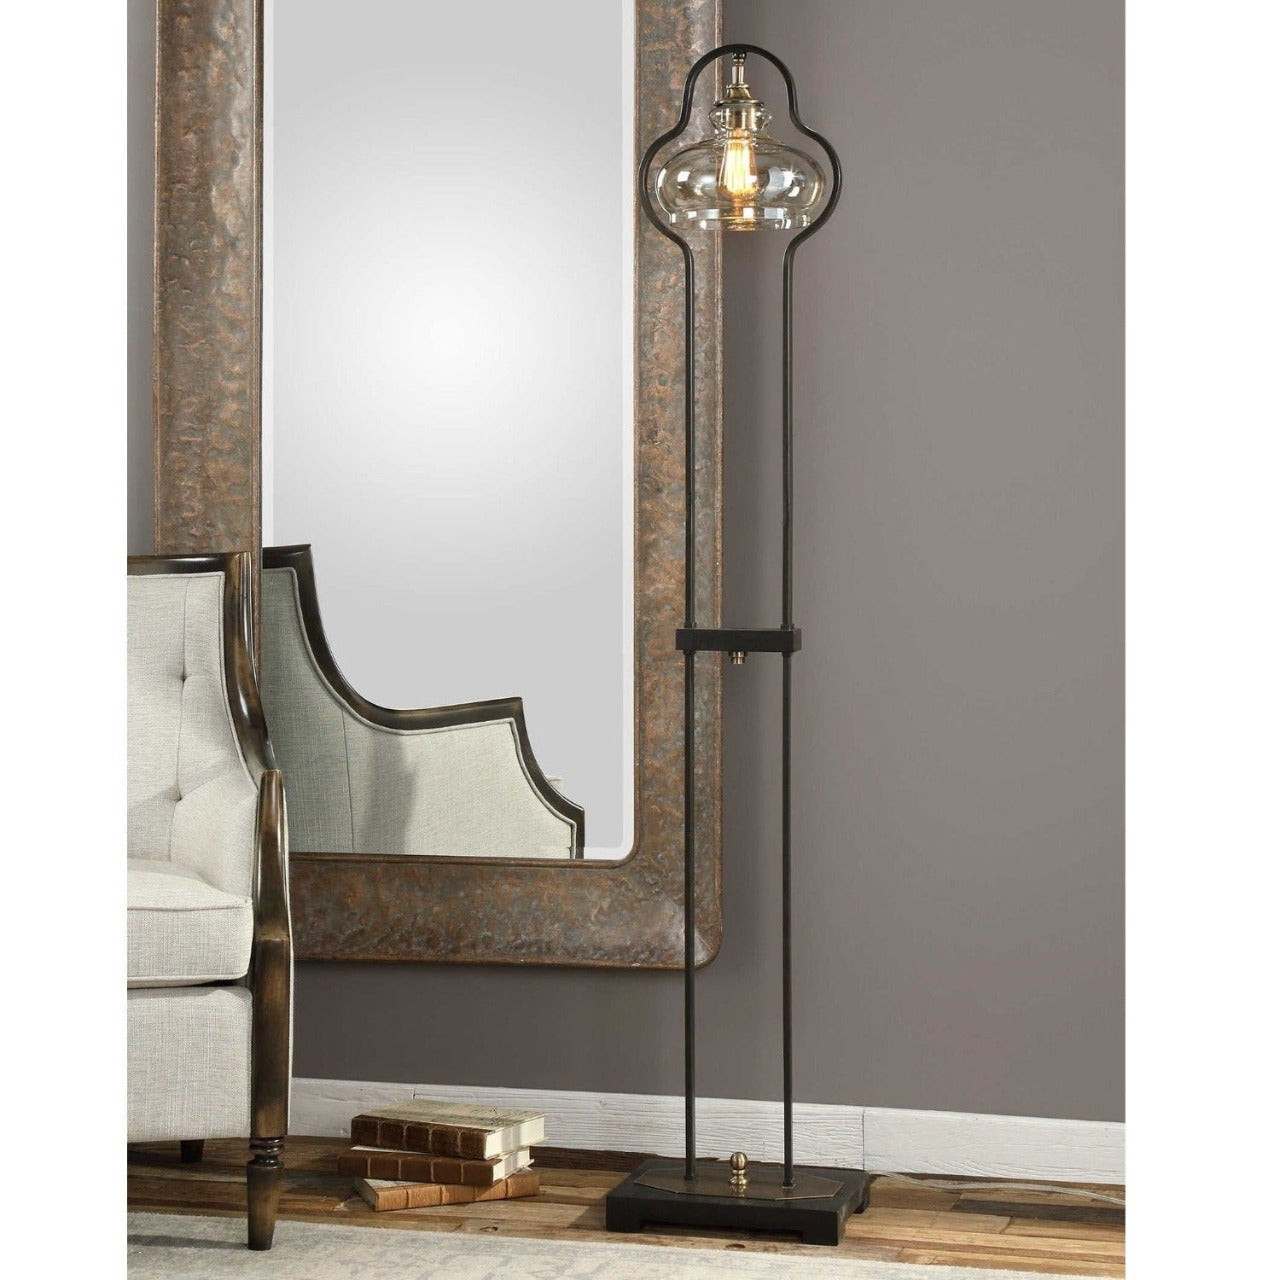 Mindy Brownes Cotulla Lamp  Curvaceous forged iron finished in an aged black, following the contour of the light amber glass shade, accented with brushed, antiqued brass plated details. 60 watt, BT-58 antique style bulb included.